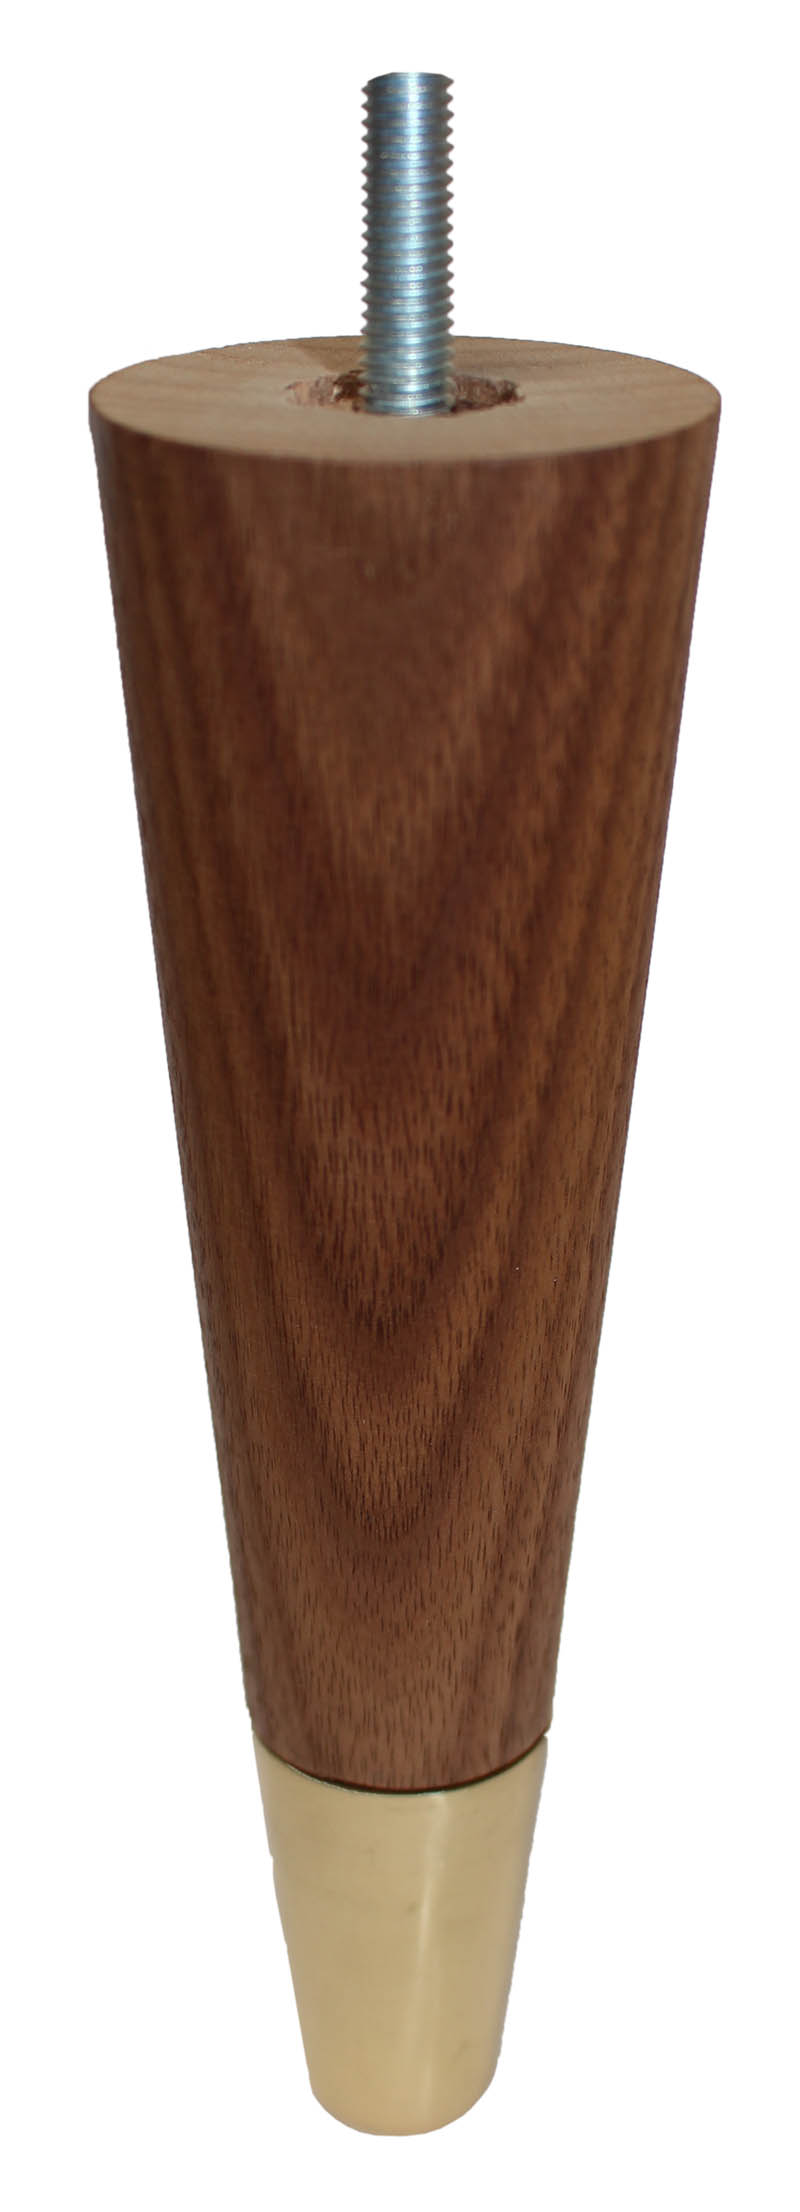 Andrea Solid Walnut Tapered Furniture Legs - Natural Waxed Finish - Brass Slipper Cups - Set of 4